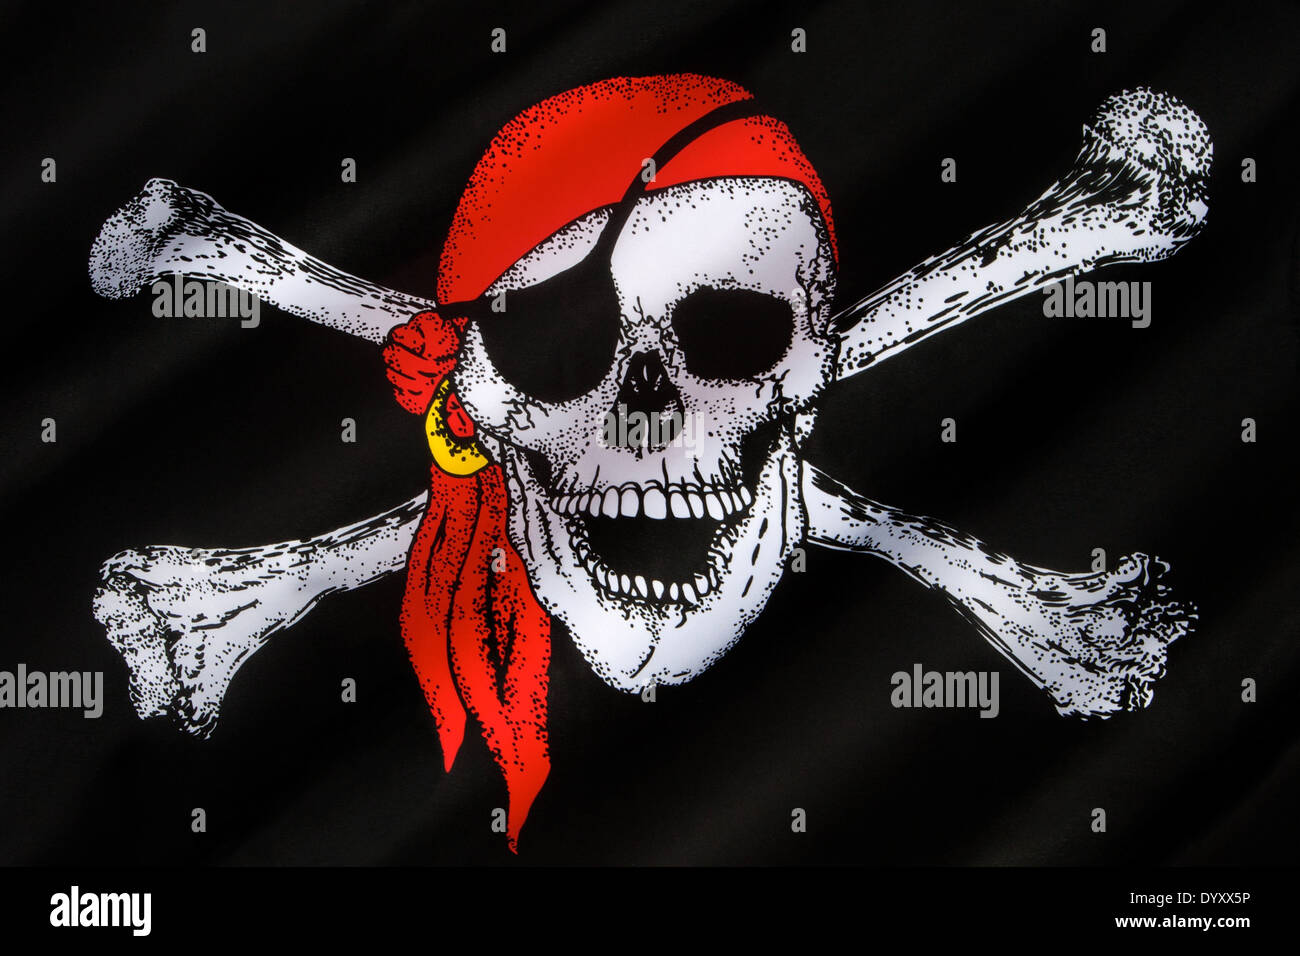 Skull And Crossbones High Resolution Stock Photography and Images - Alamy